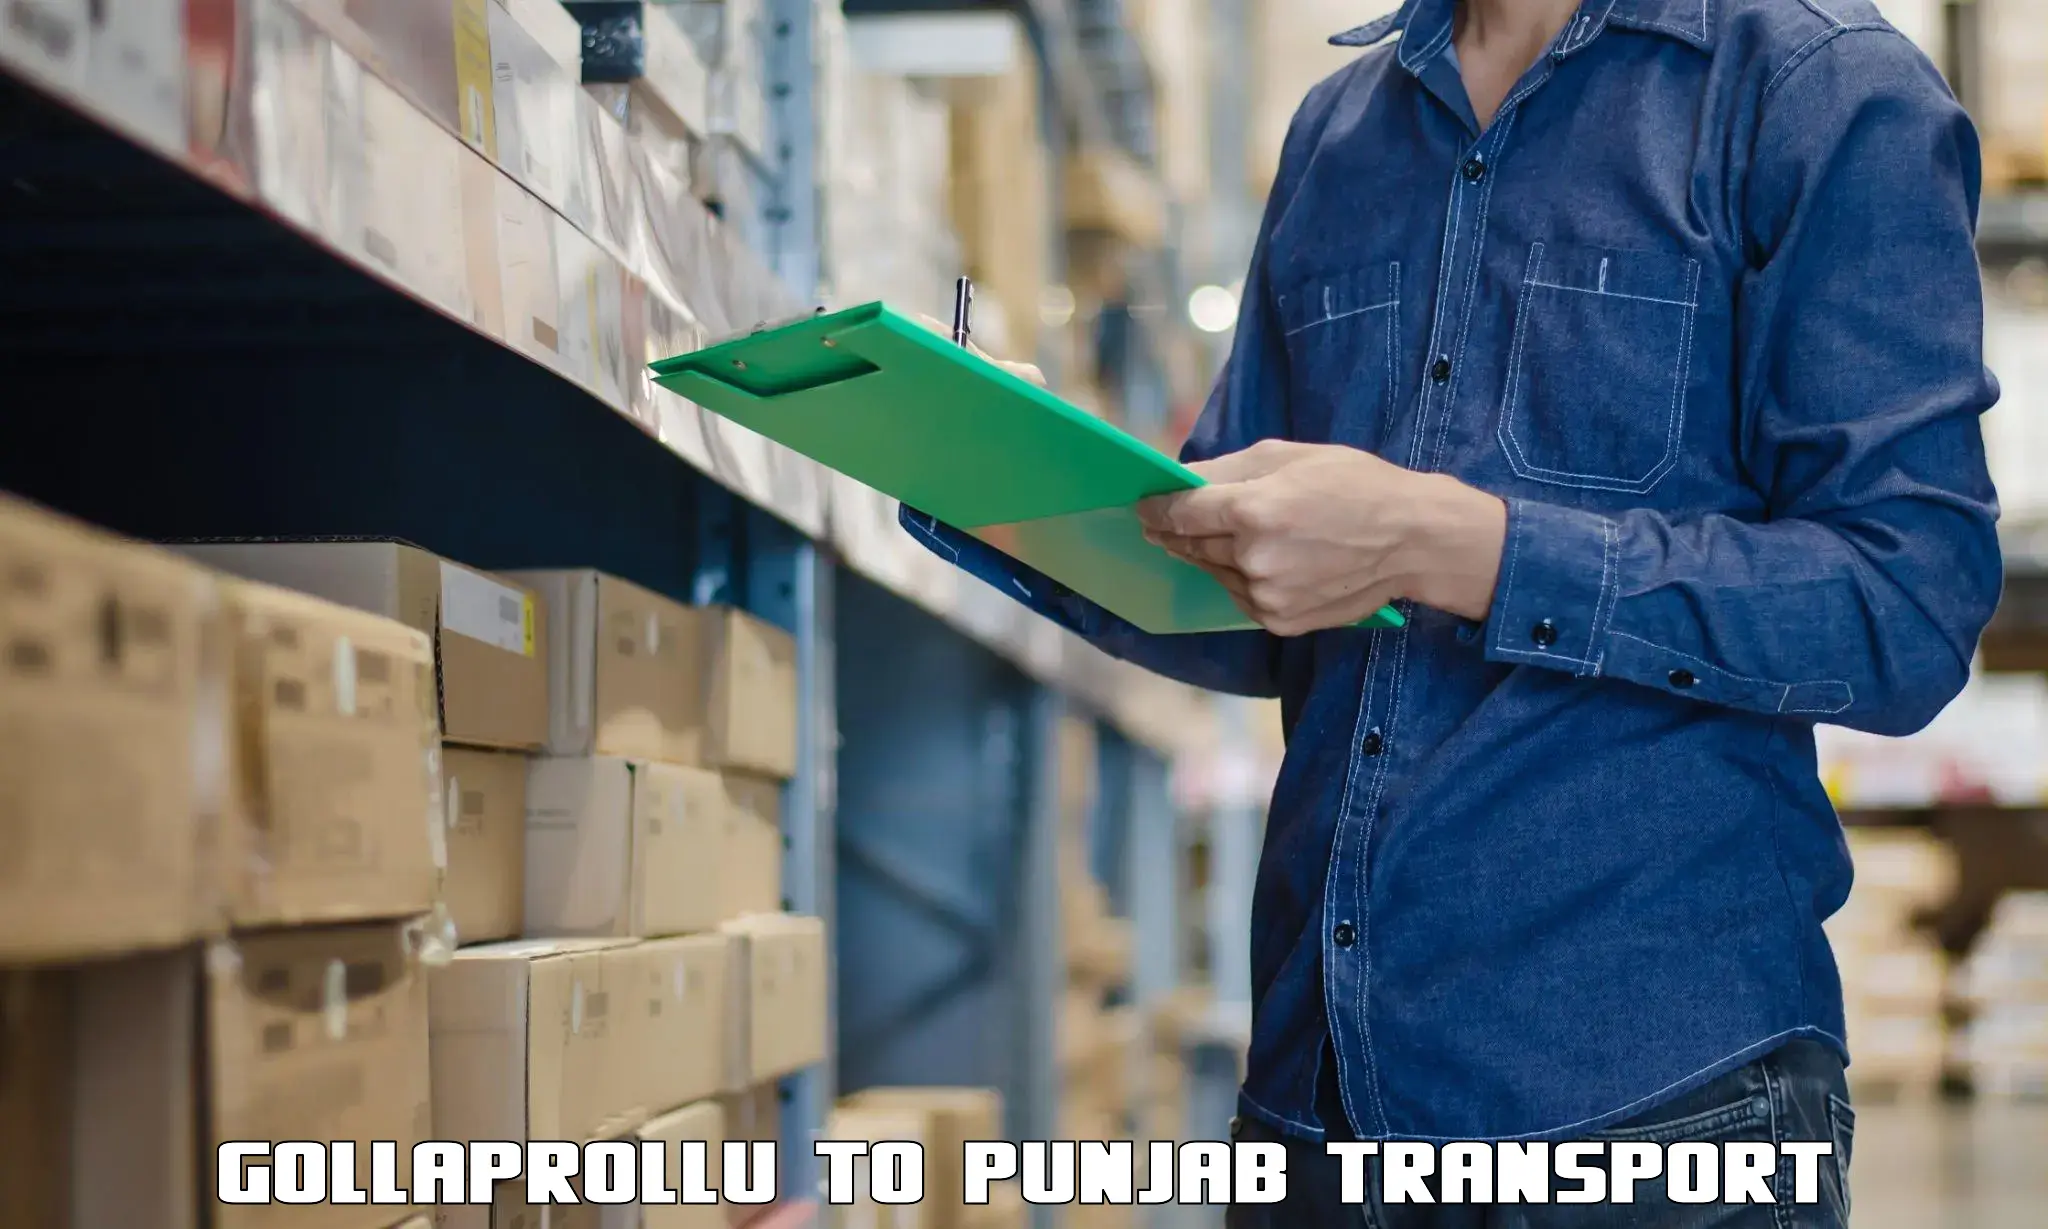 Air cargo transport services in Gollaprollu to Central University of Punjab Bathinda